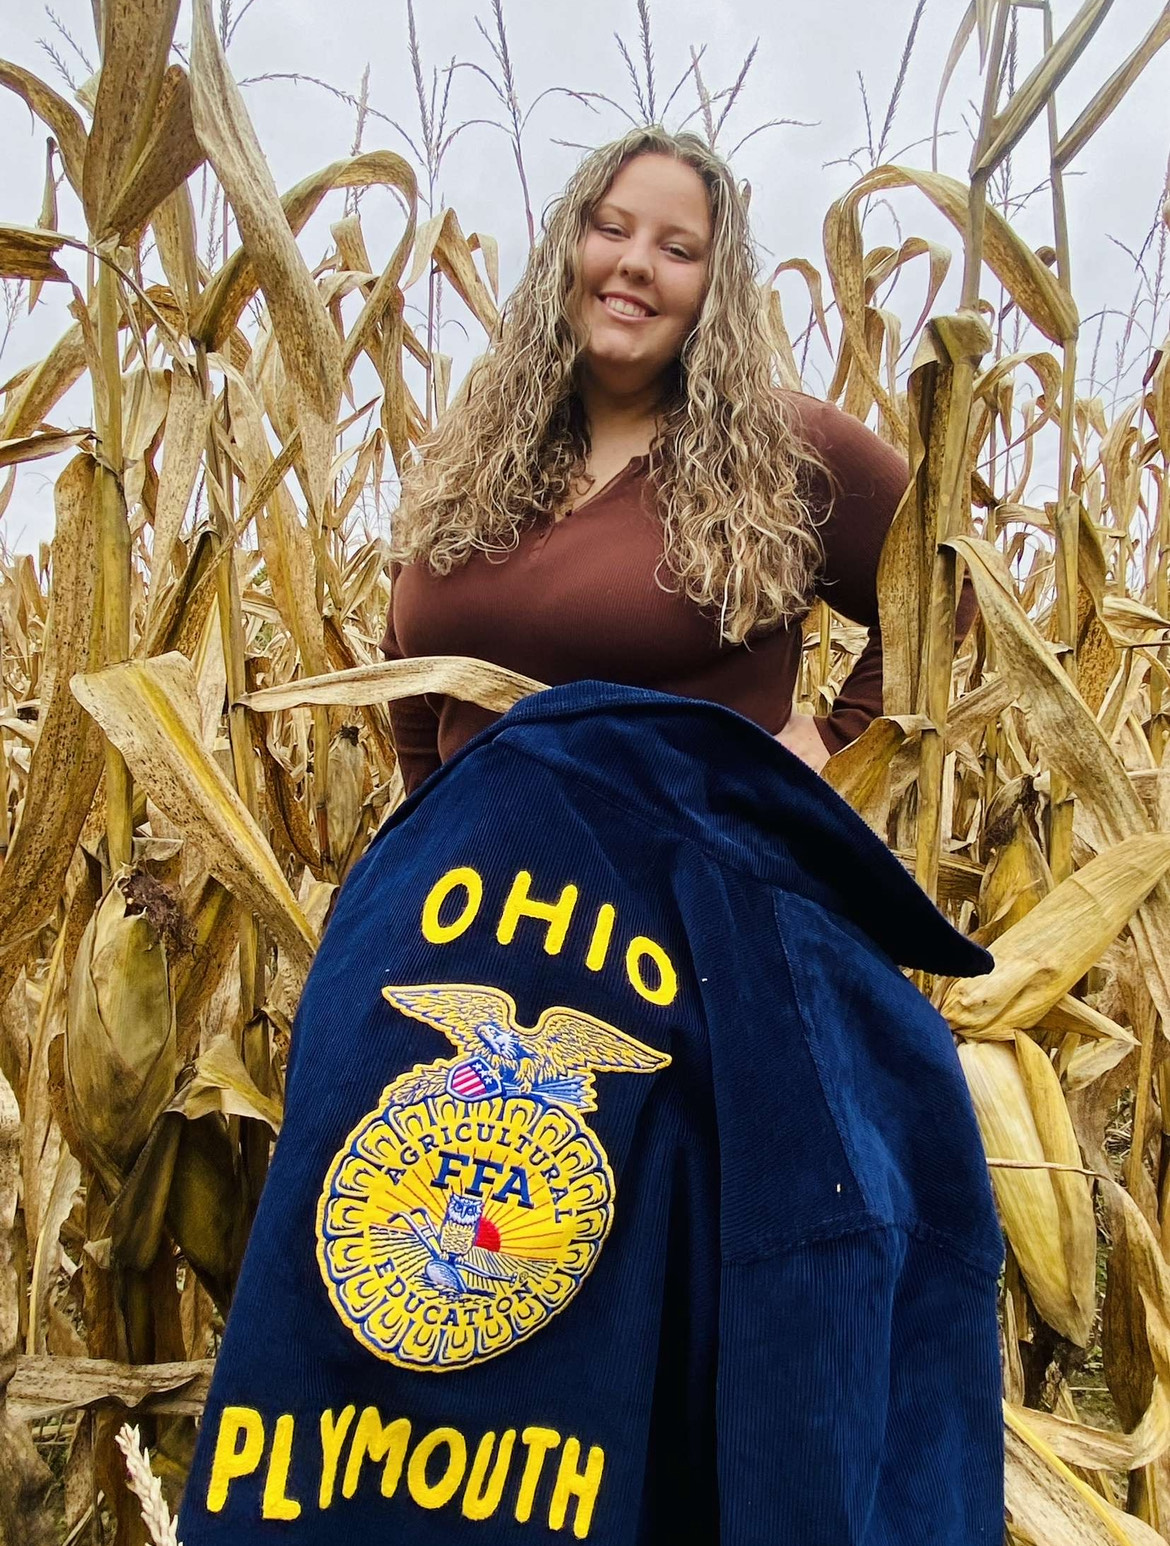 A woman standing in a corn field wearing a jacket, surrounded by tall stalks of corn.